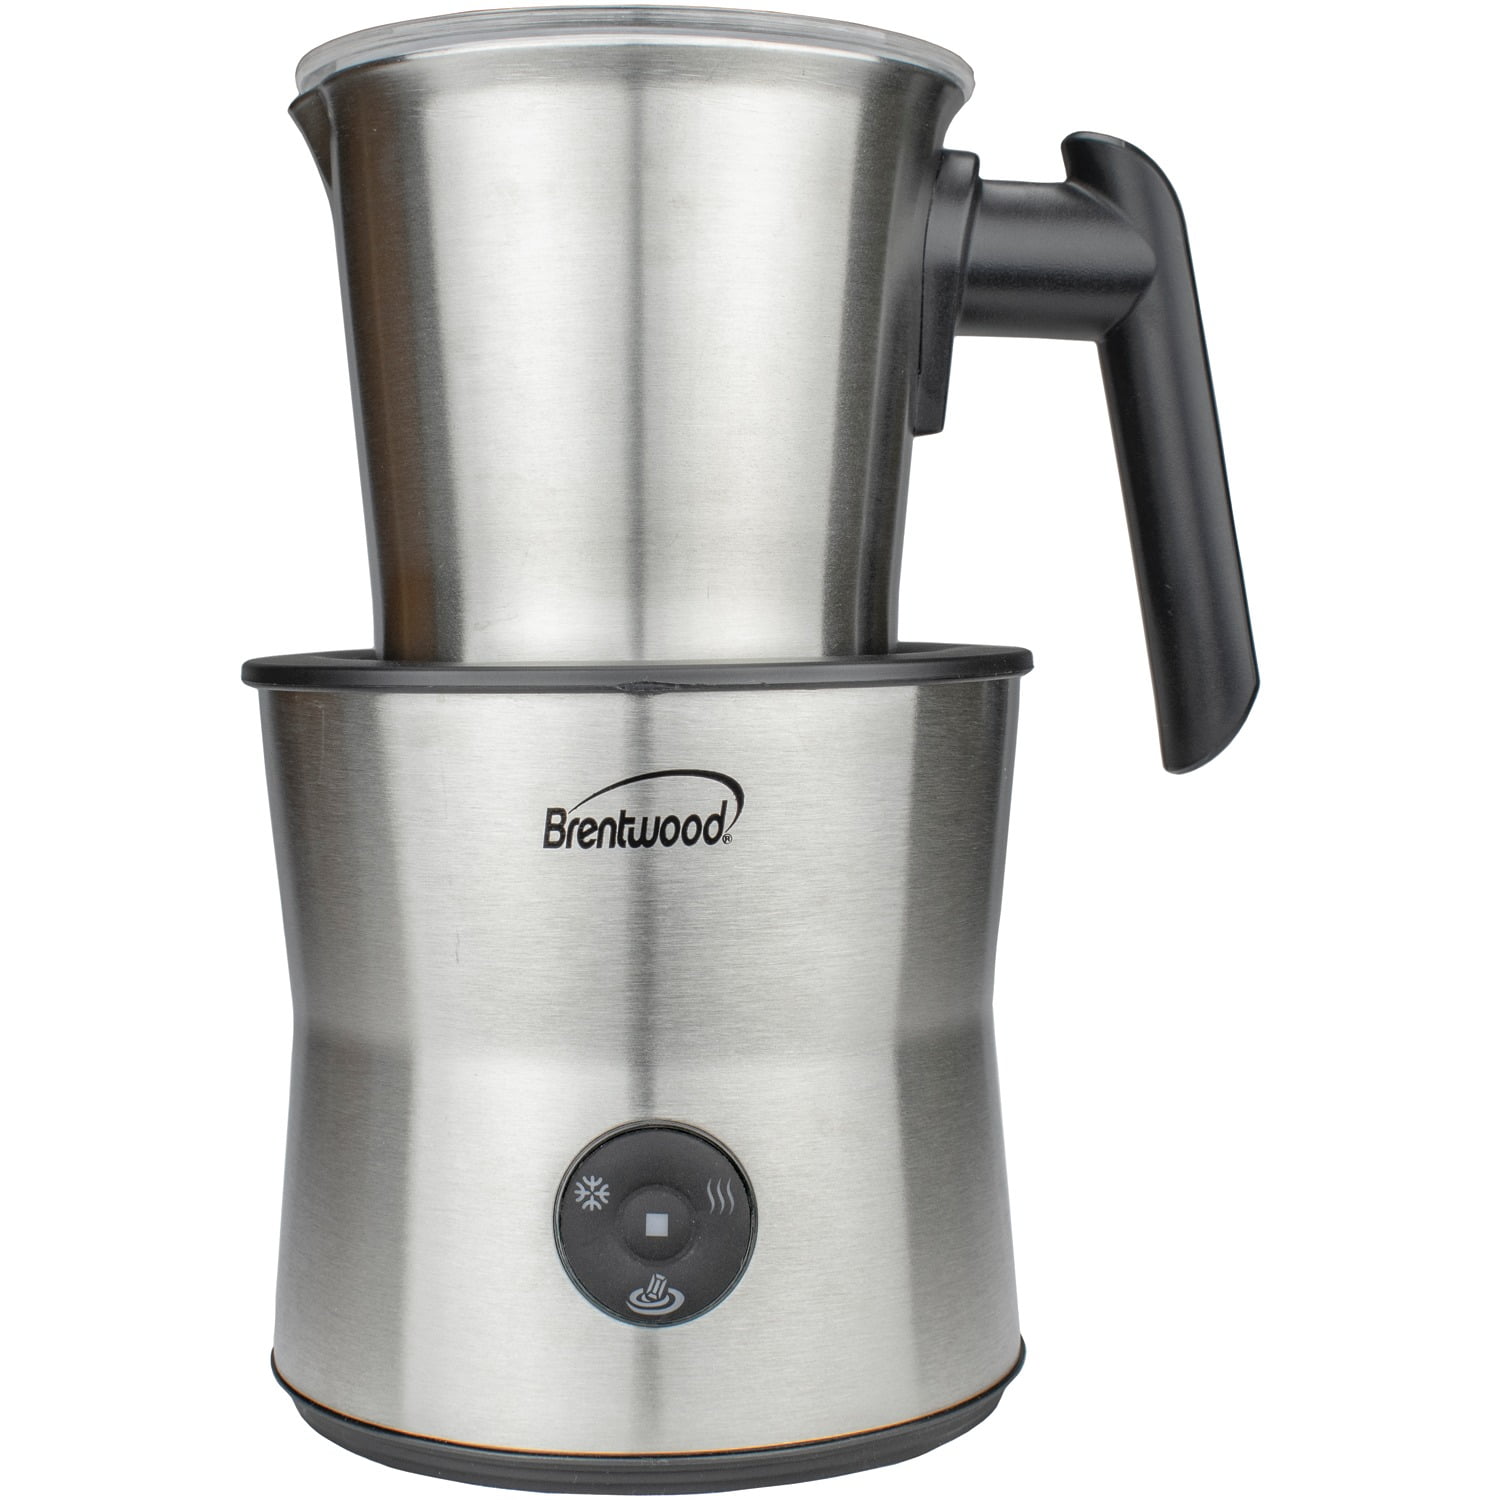 Brentwood 10 Ounce Electric Milk Frother And Warmer In Black : Target